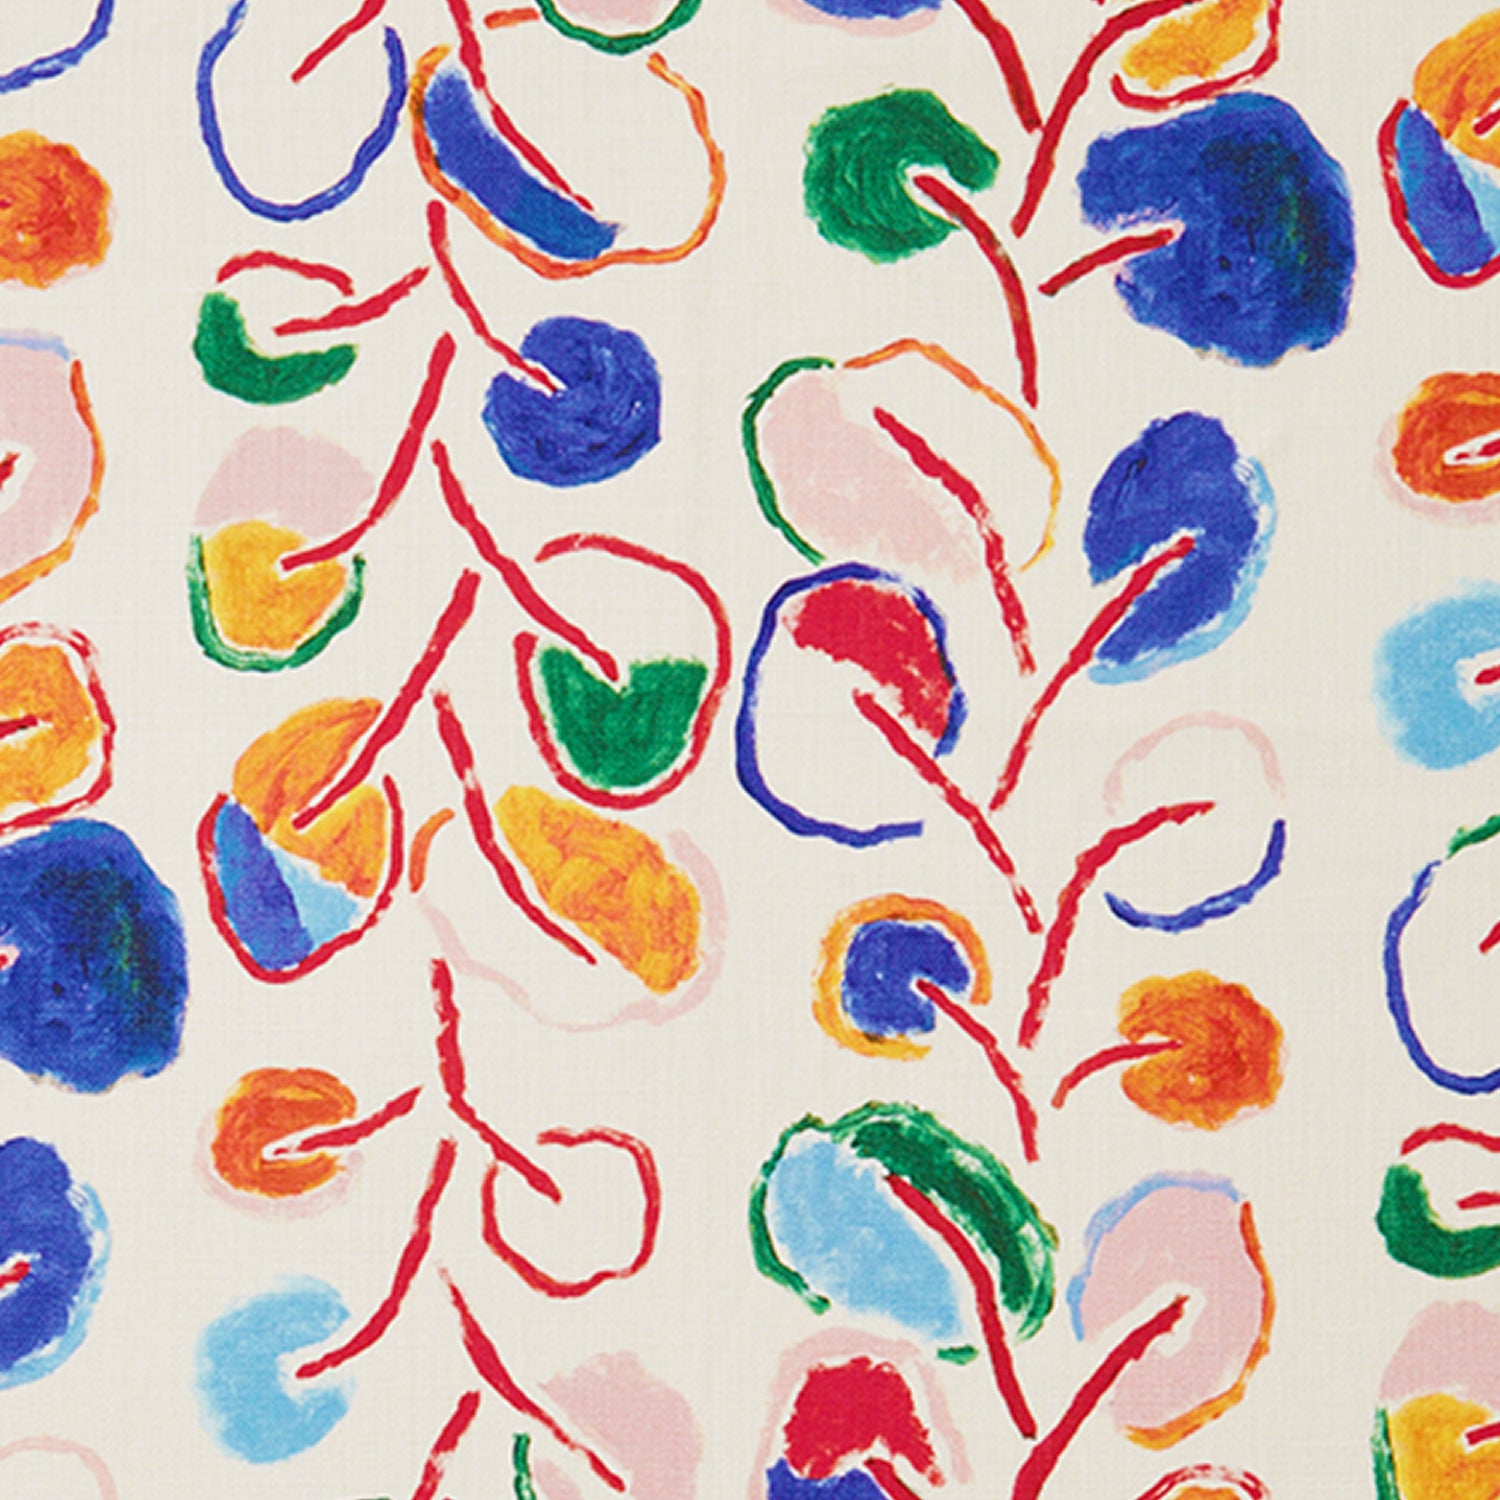 Trees of Derain printed linen fabric detail image, the design is a handpainted floral featuring many colors, cobalt, red, pink, orange, blue on a white ground, hover